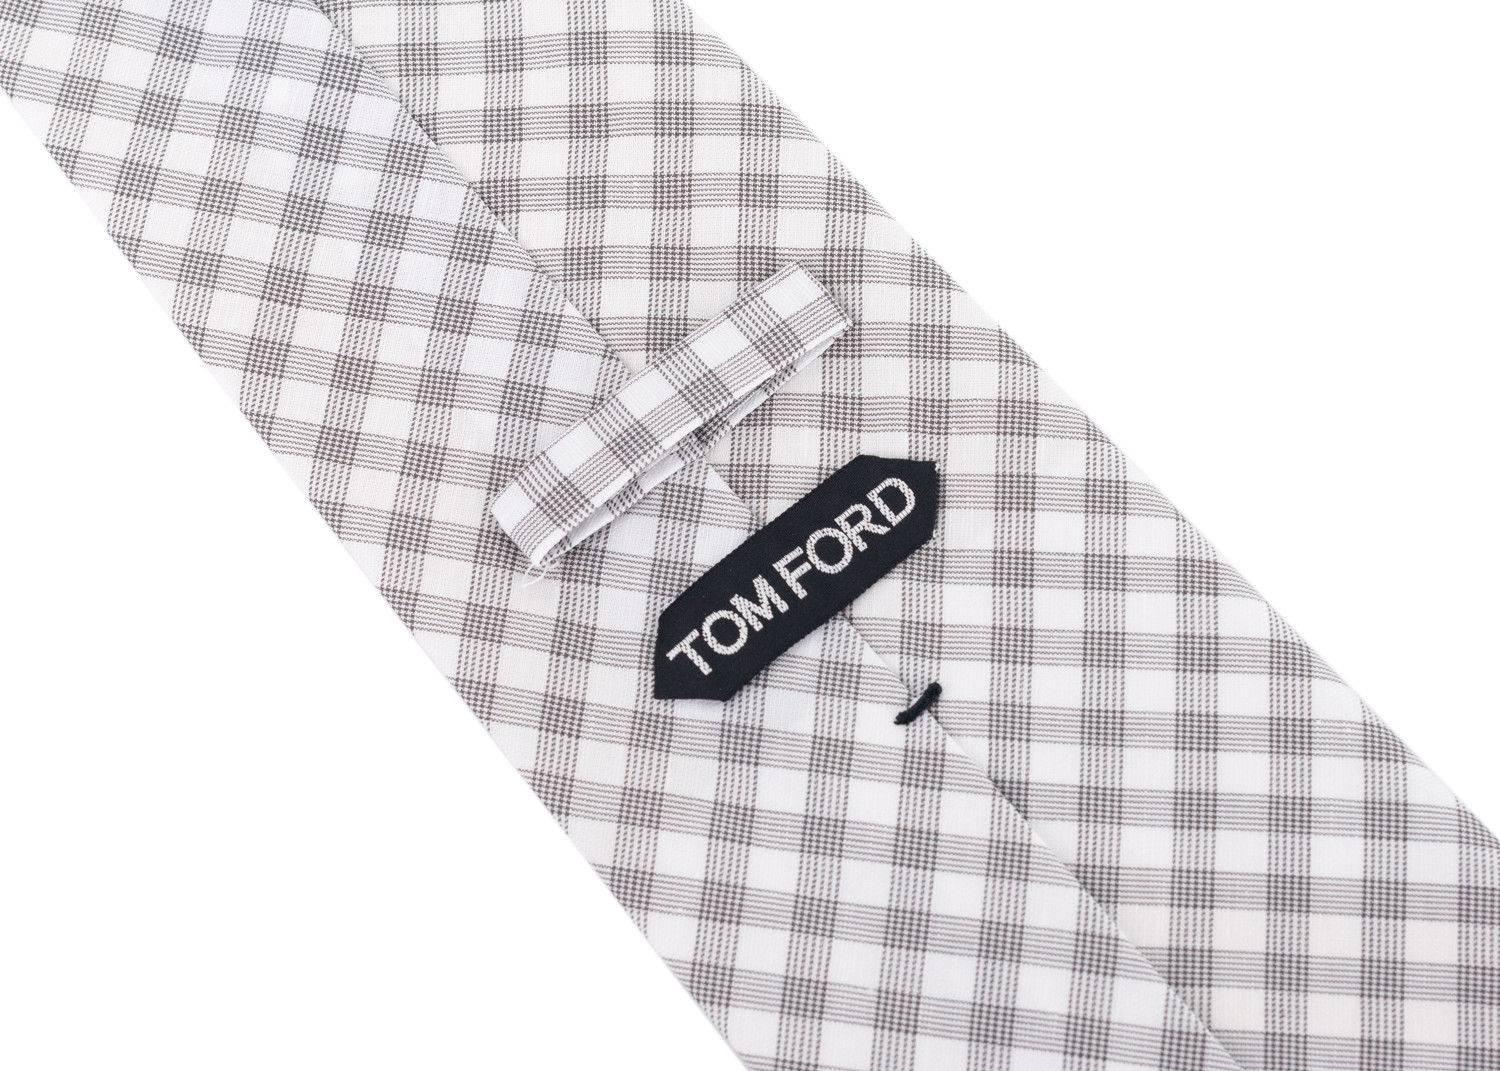 Italian luxury brand, Tom Ford, has crafted these gorgeous Cotton Blend Tie for important special occasions and professional events. The tie is great to pair with your favorite solid color button down and blazers with your chosen pair or classic